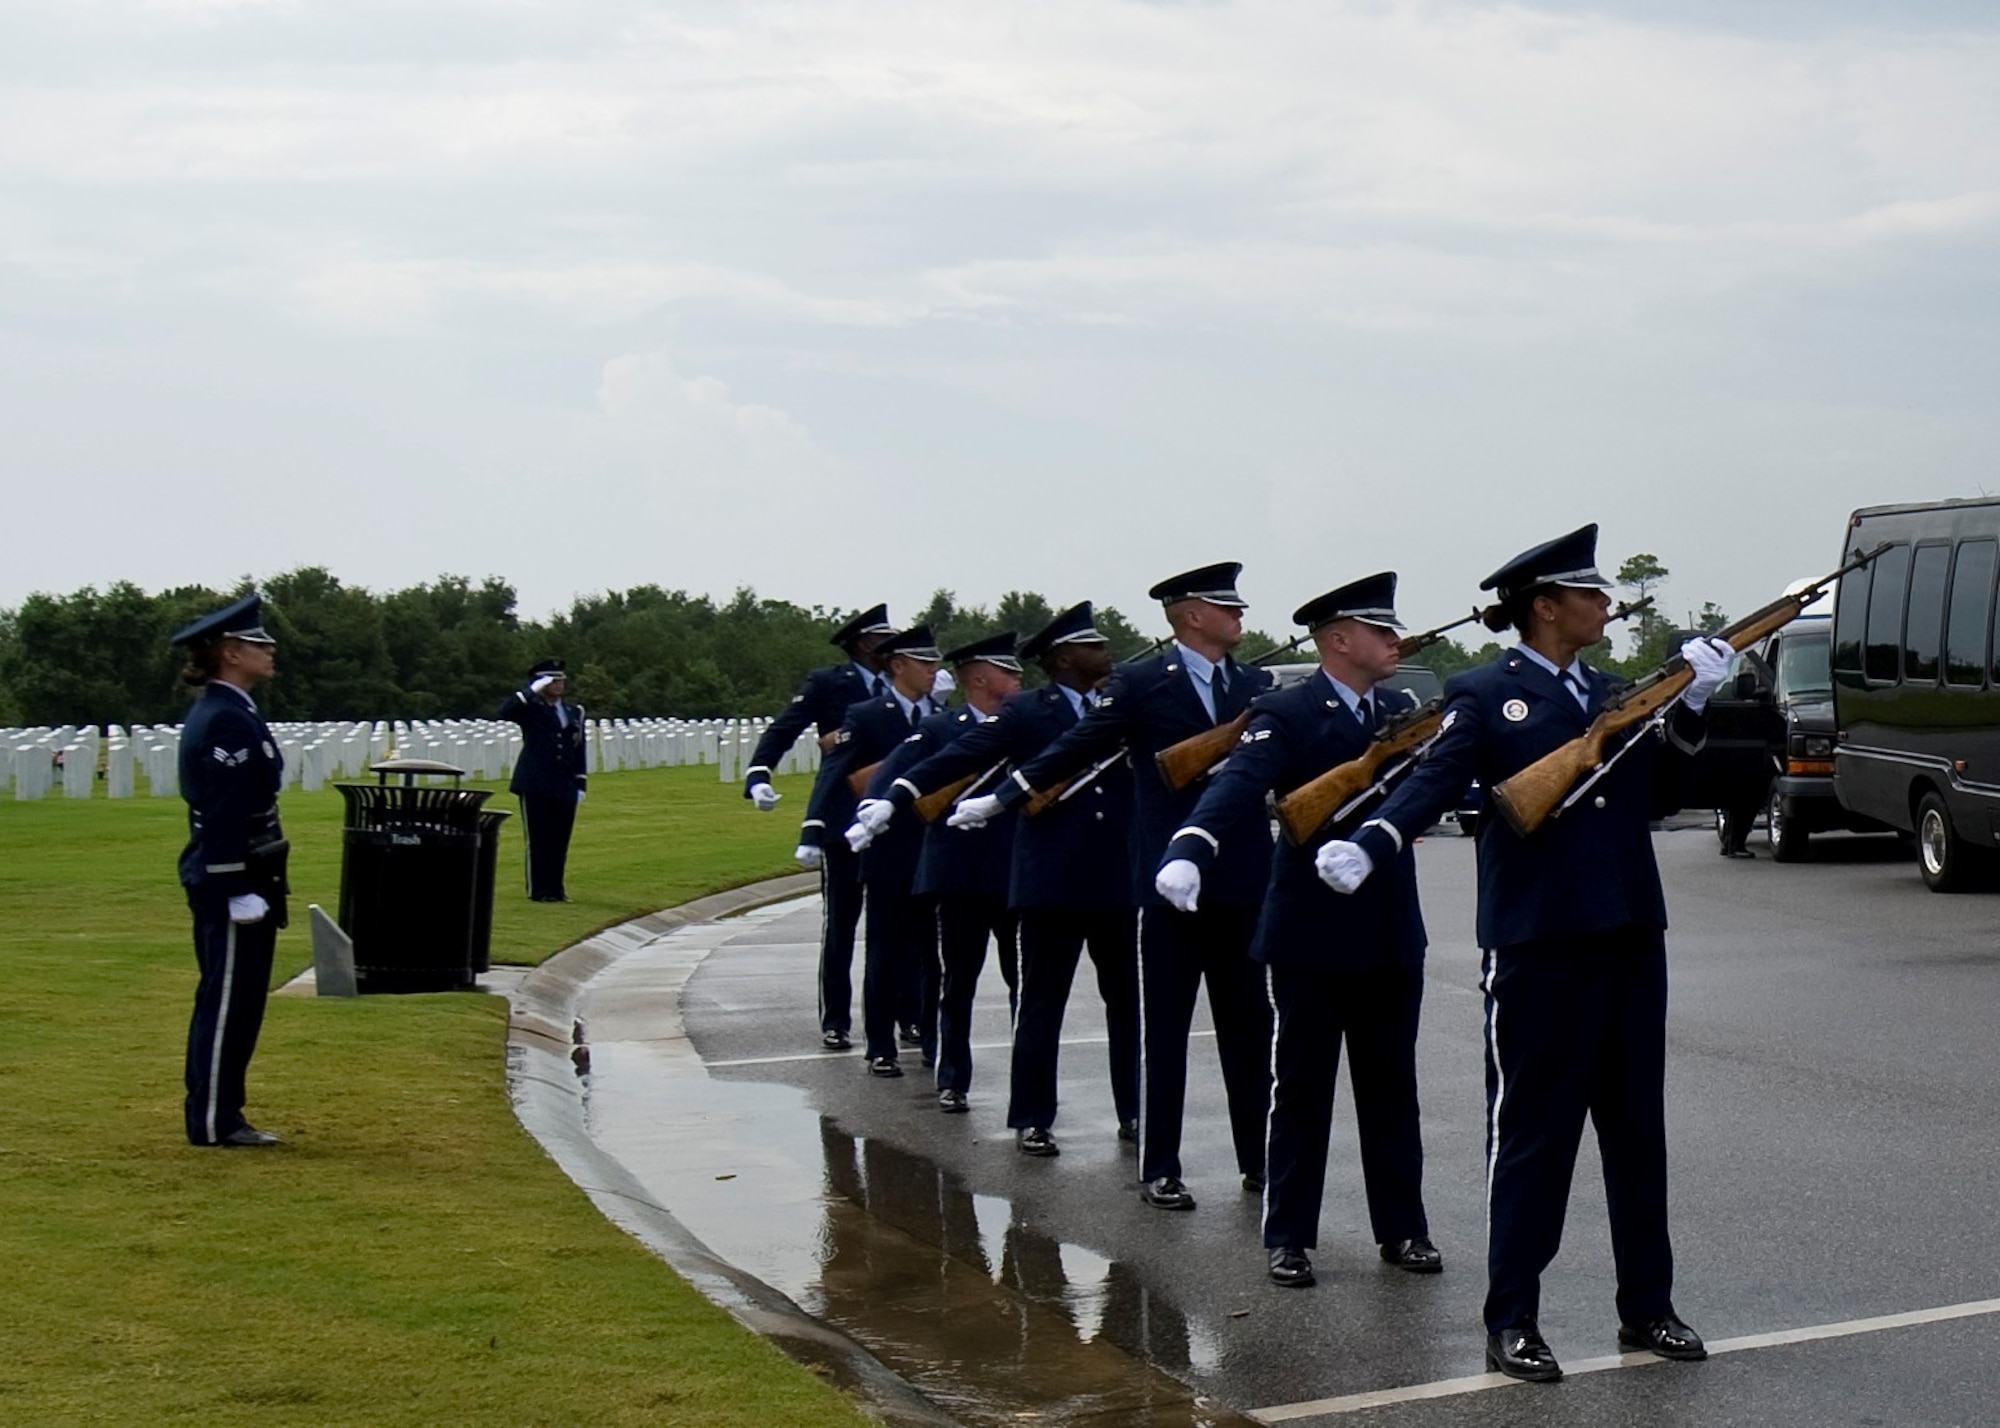 The Hurlburt Field Honor Guard firing team performs a 21-gun salute at the funeral service for retired U.S. Air Force Col. George “Bud” Day at Barrancas National Cemetery on Naval Air Station Pensacola, Fla., Aug. 1, 2013. Day, a Medal of Honor recipient and combat pilot with service in World War II, Korea and Vietnam, passed away July 27 at the age of 88. (U.S. Air Force Photo/Staff Sgt. John Bainter) 